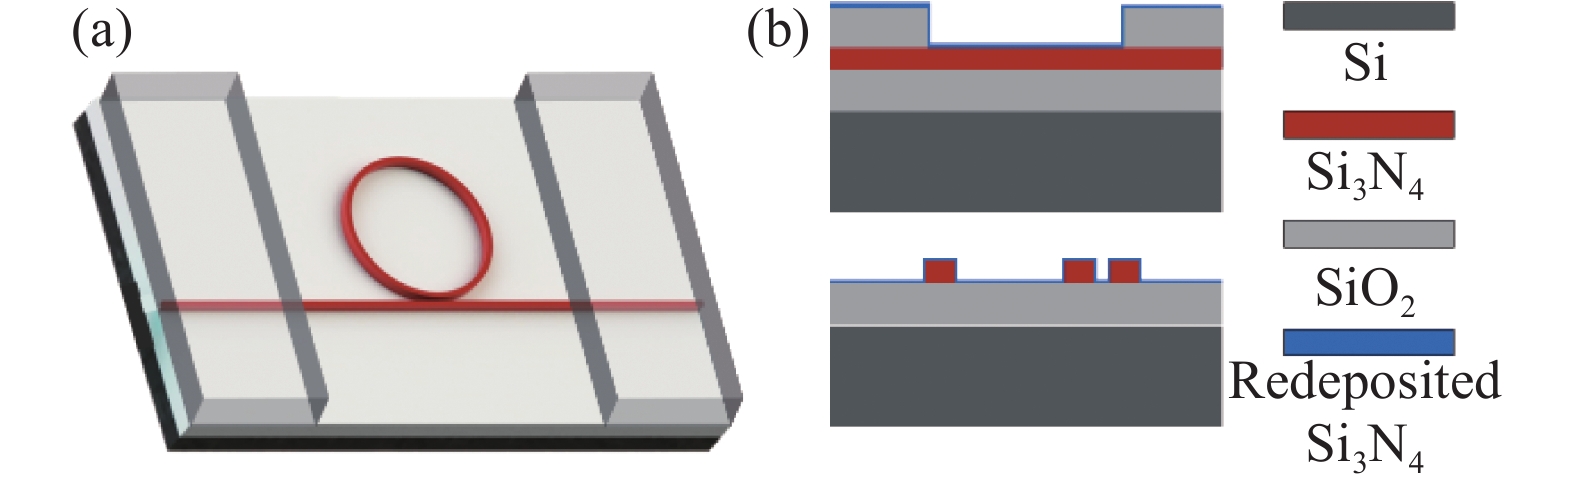 (a) Schematic diagram of the silicon nitride microring resonator before redeposition of film, silica protective layer has been deposited above the coupling waveguide; (b) Side view of the silicon nitride microring resonator with the redeposited film